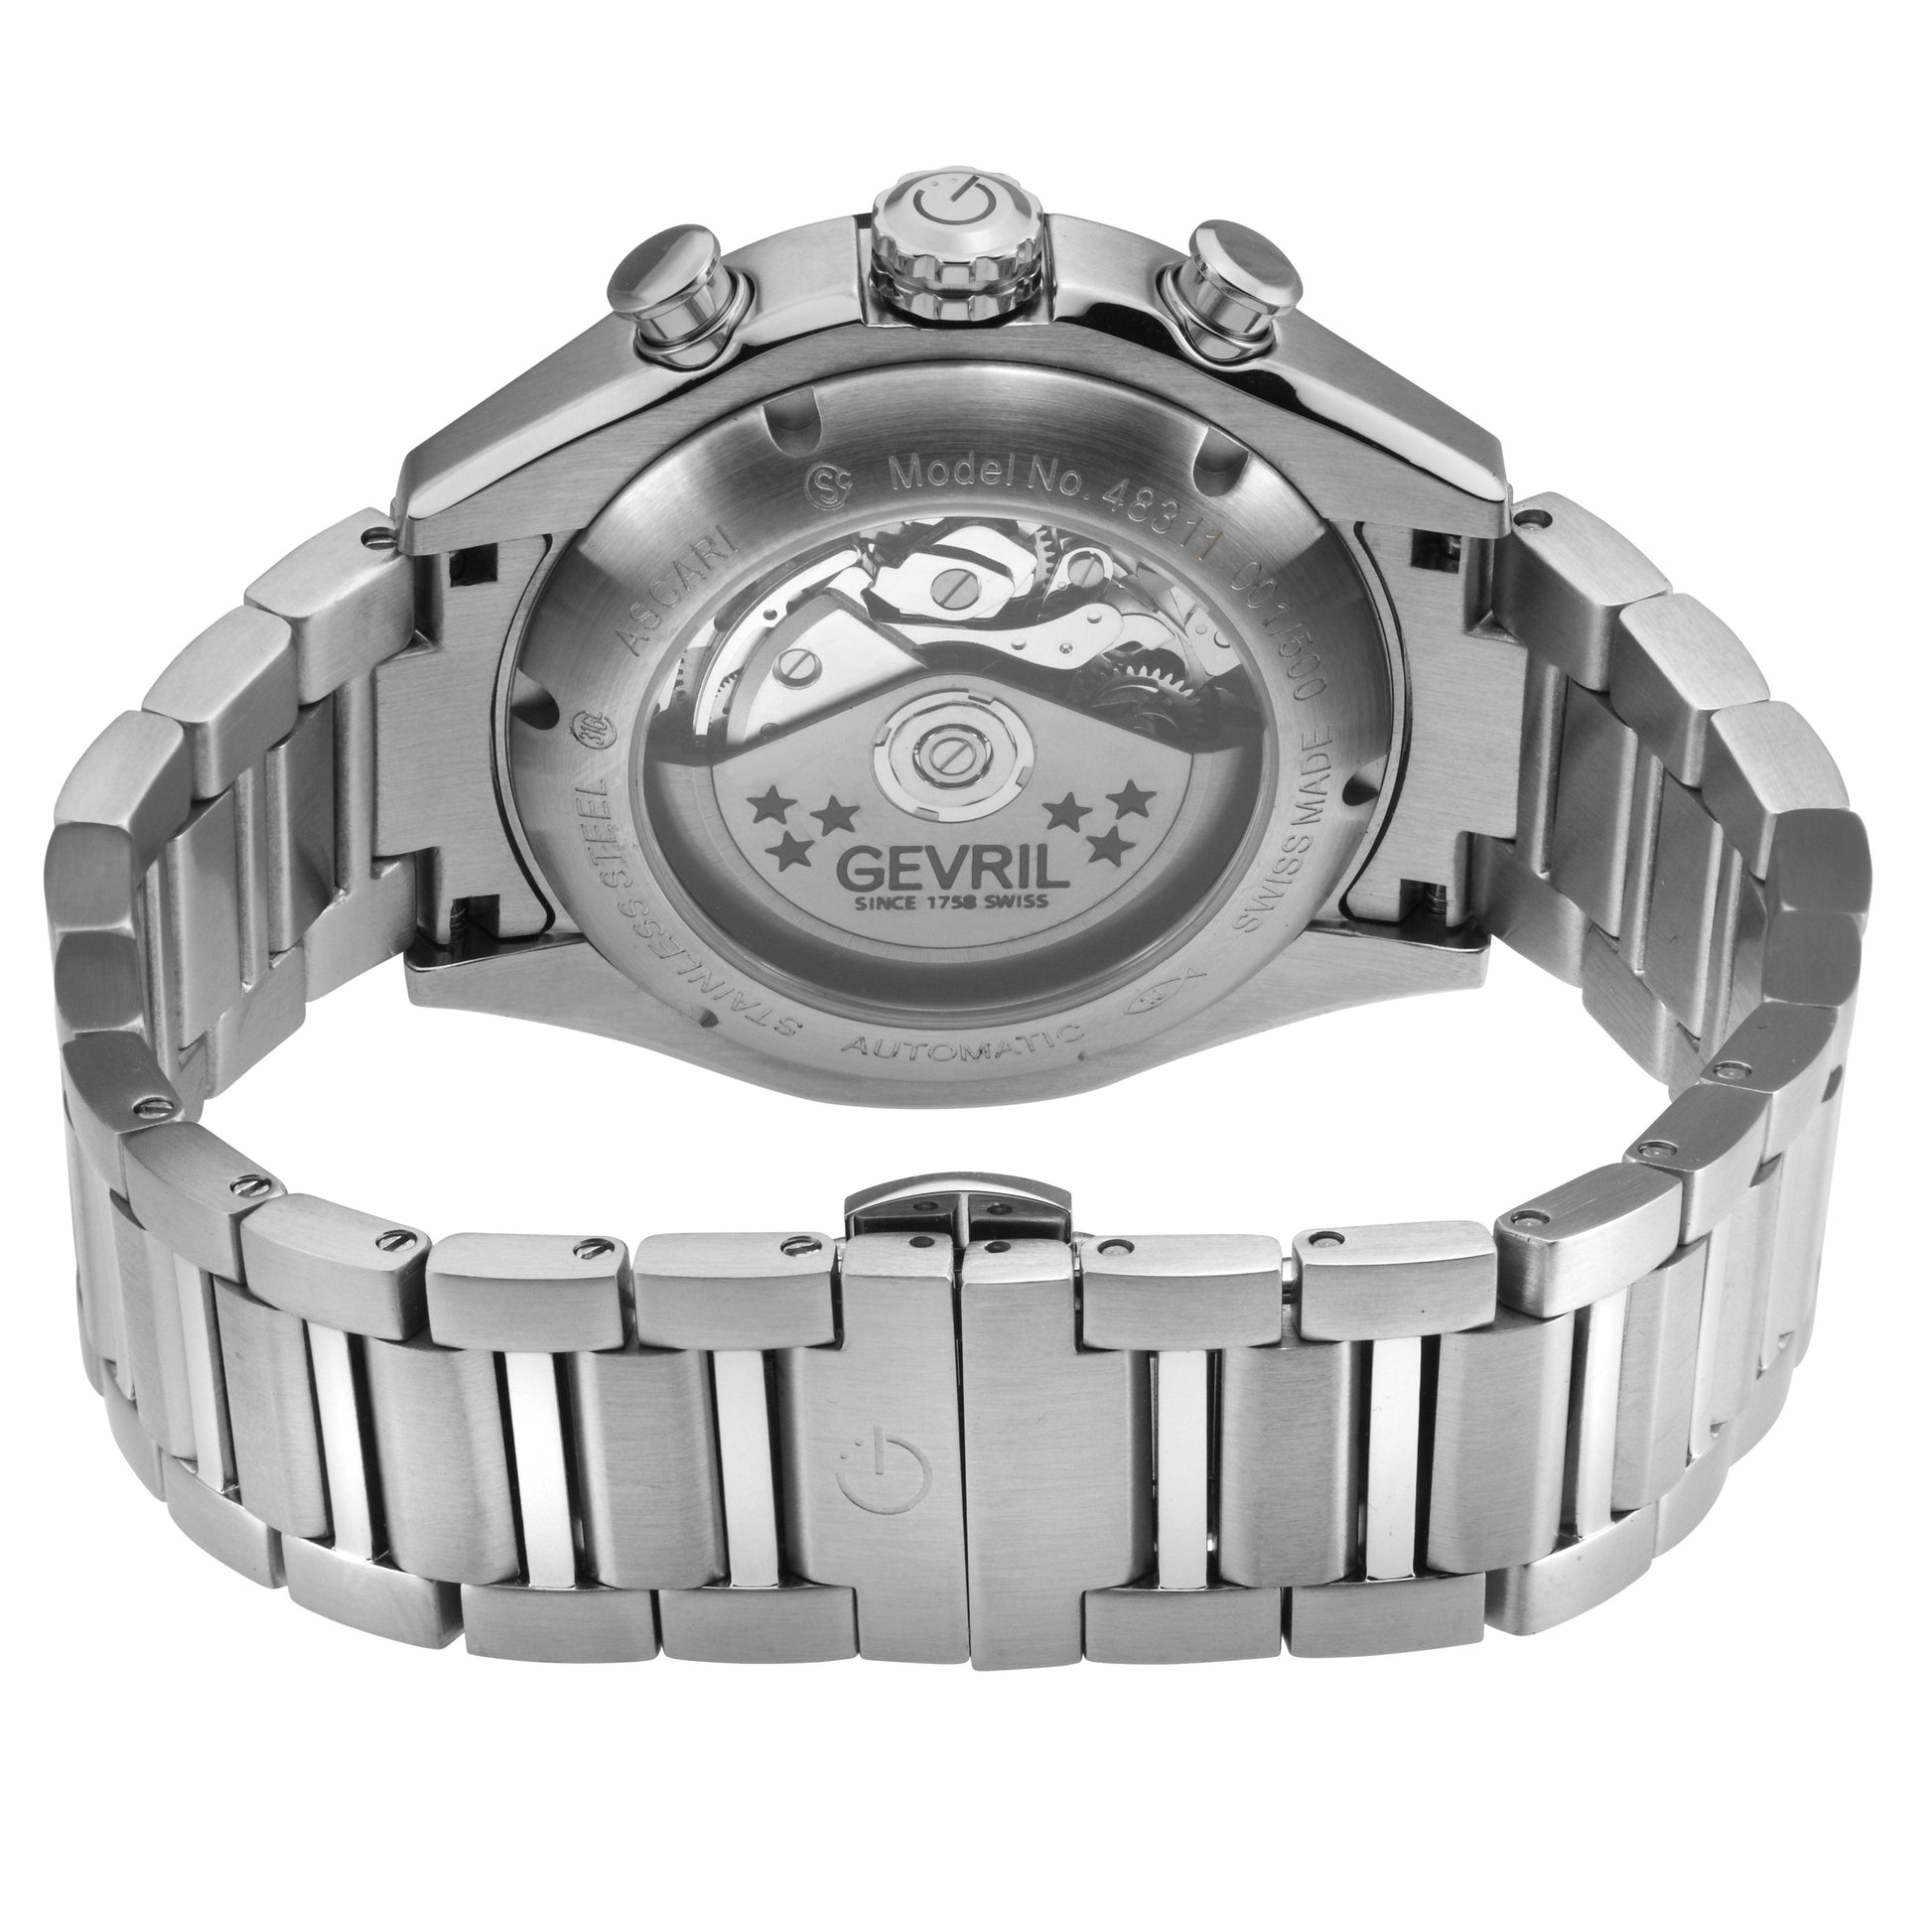 Gevril-Luxury-Swiss-Watches-Gevril Ascari - Chronograph-48310B